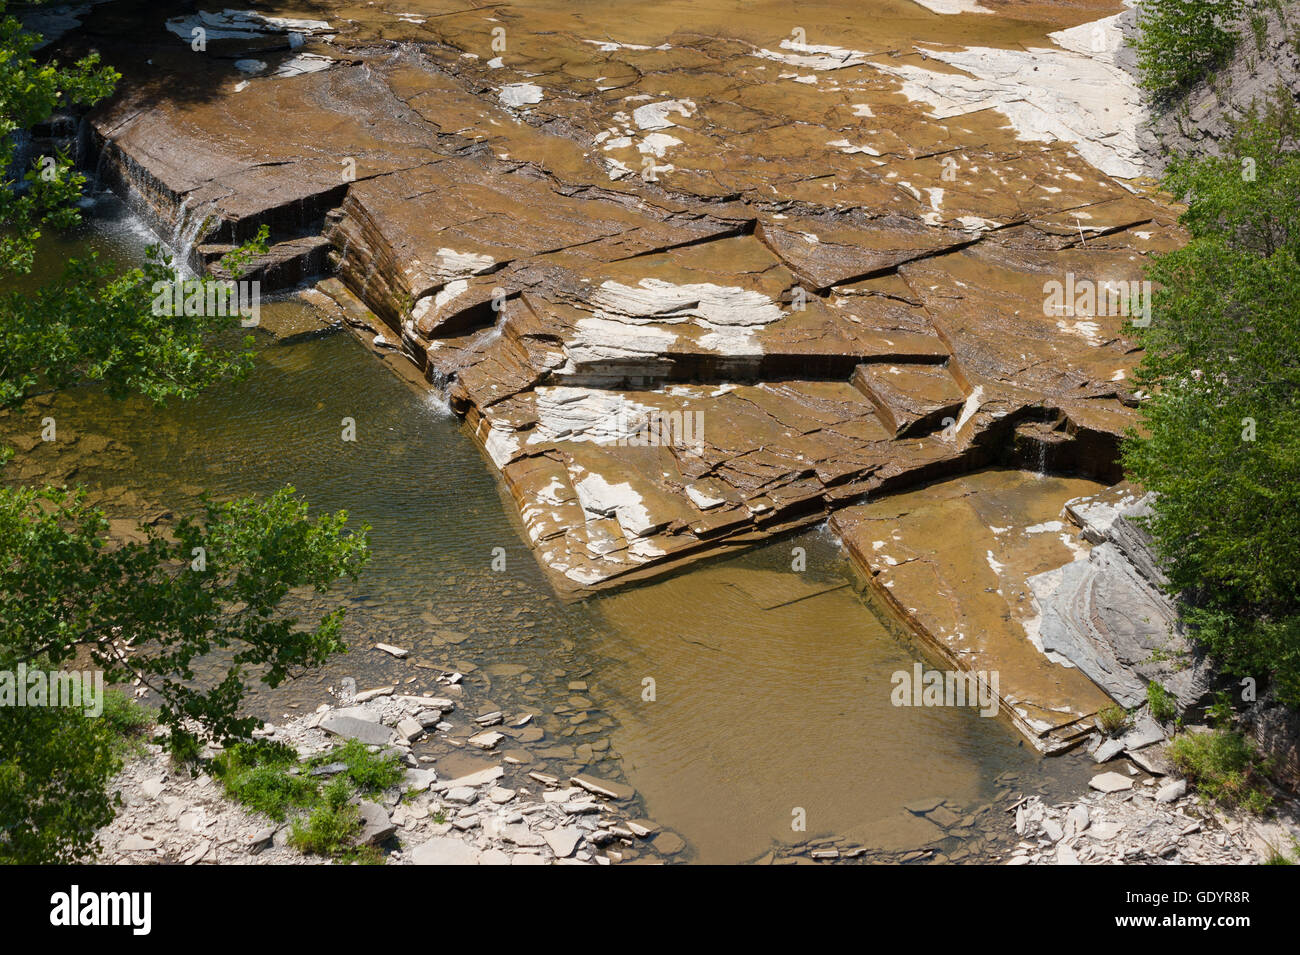 Tully forme di calcare Taughannock Creek's bed, in Taughannock cade Gorge, NY. Foto Stock